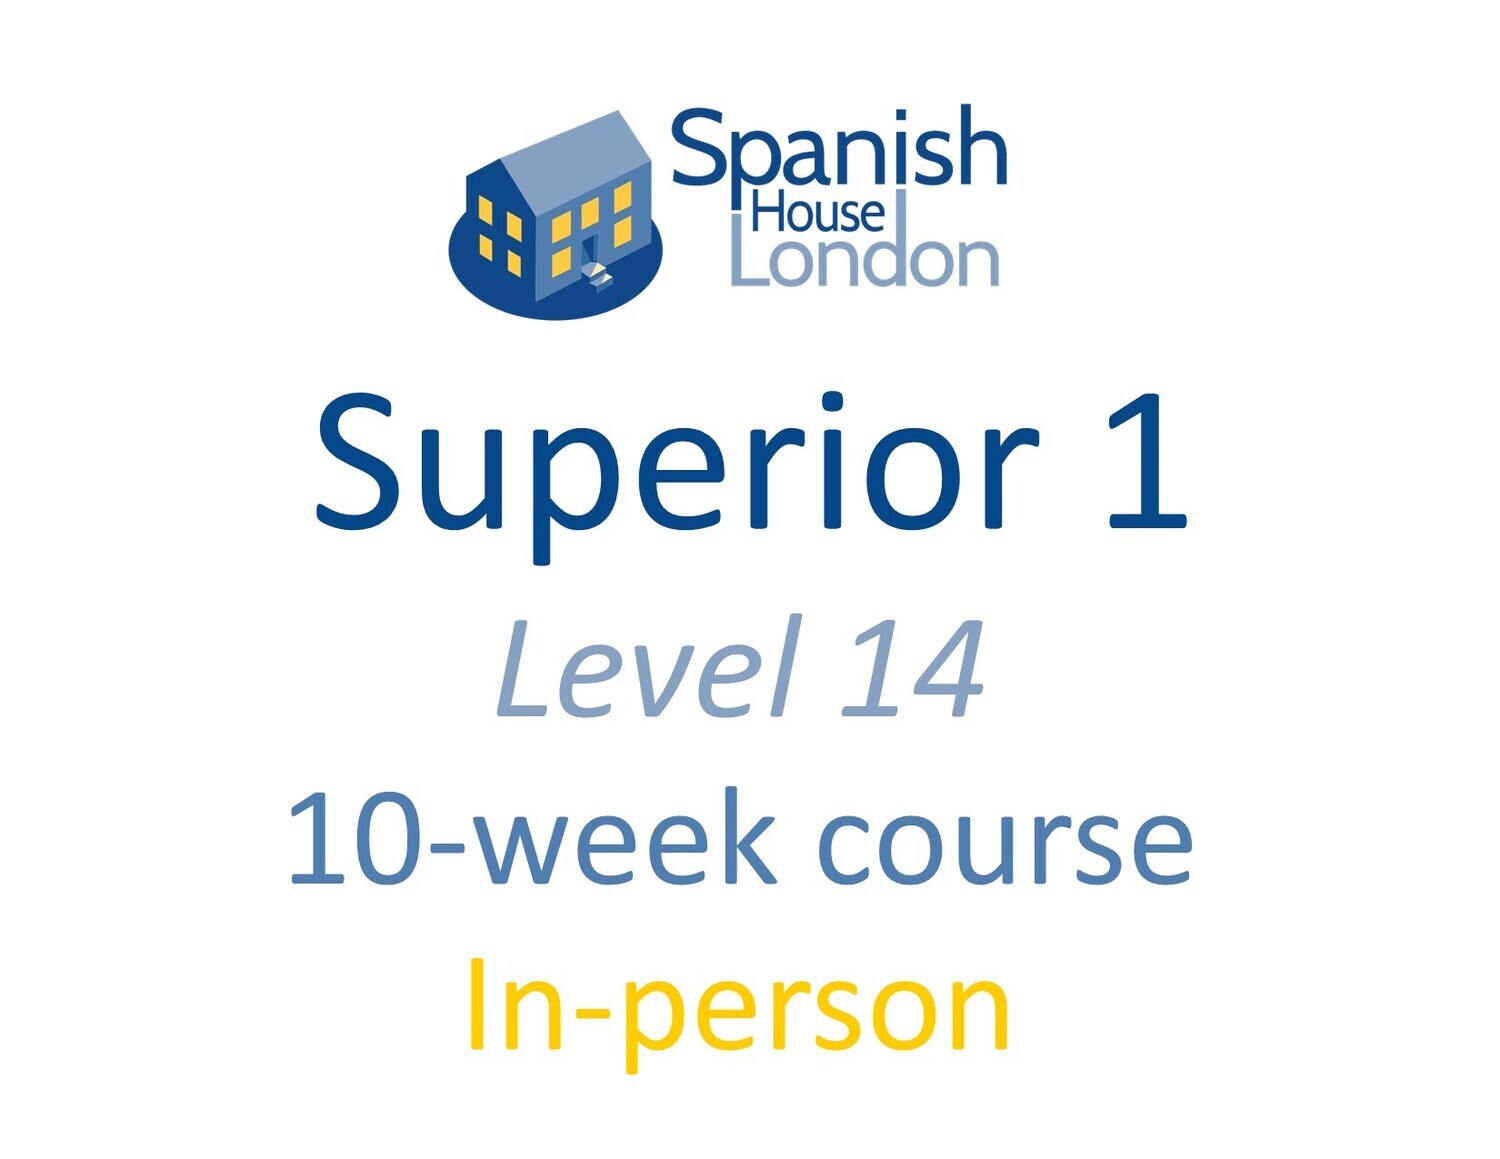 Superior 1 Course starting on 23rd March at 7.30pm in Clapham North